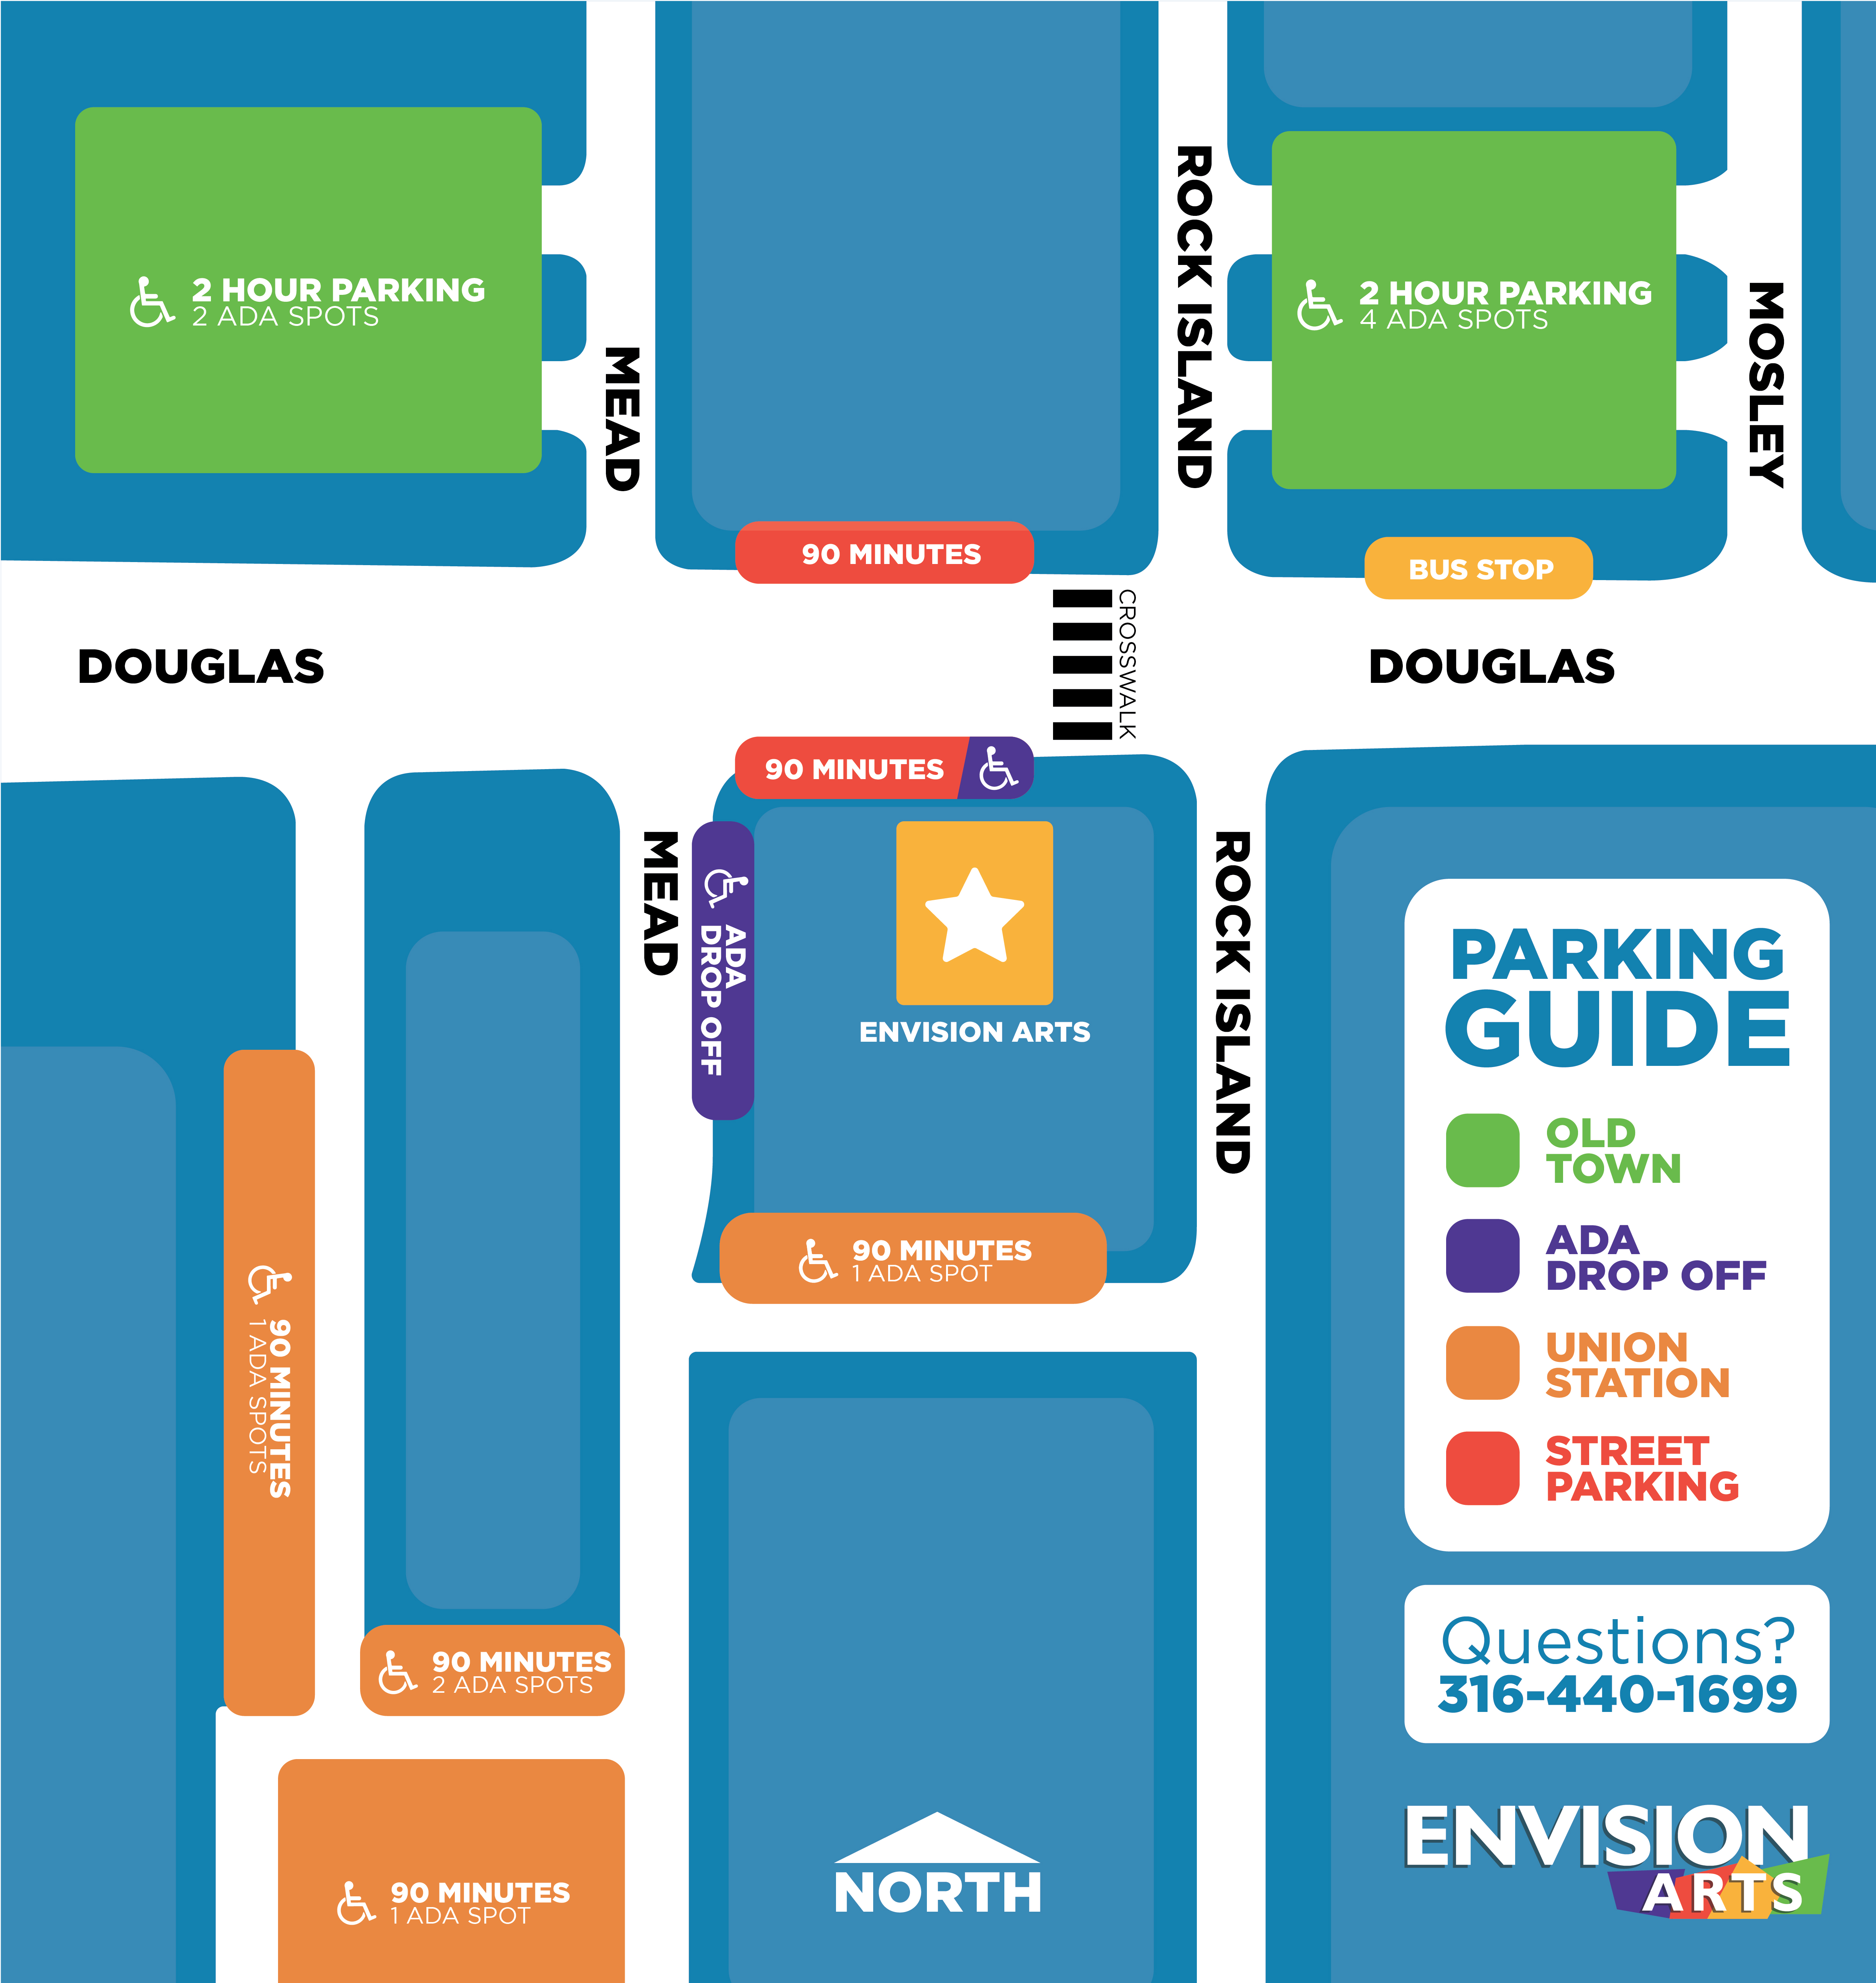 graphical map of the Envision Arts Gallery location on Douglas St. in between Mead St. and Rock Island Ave. 